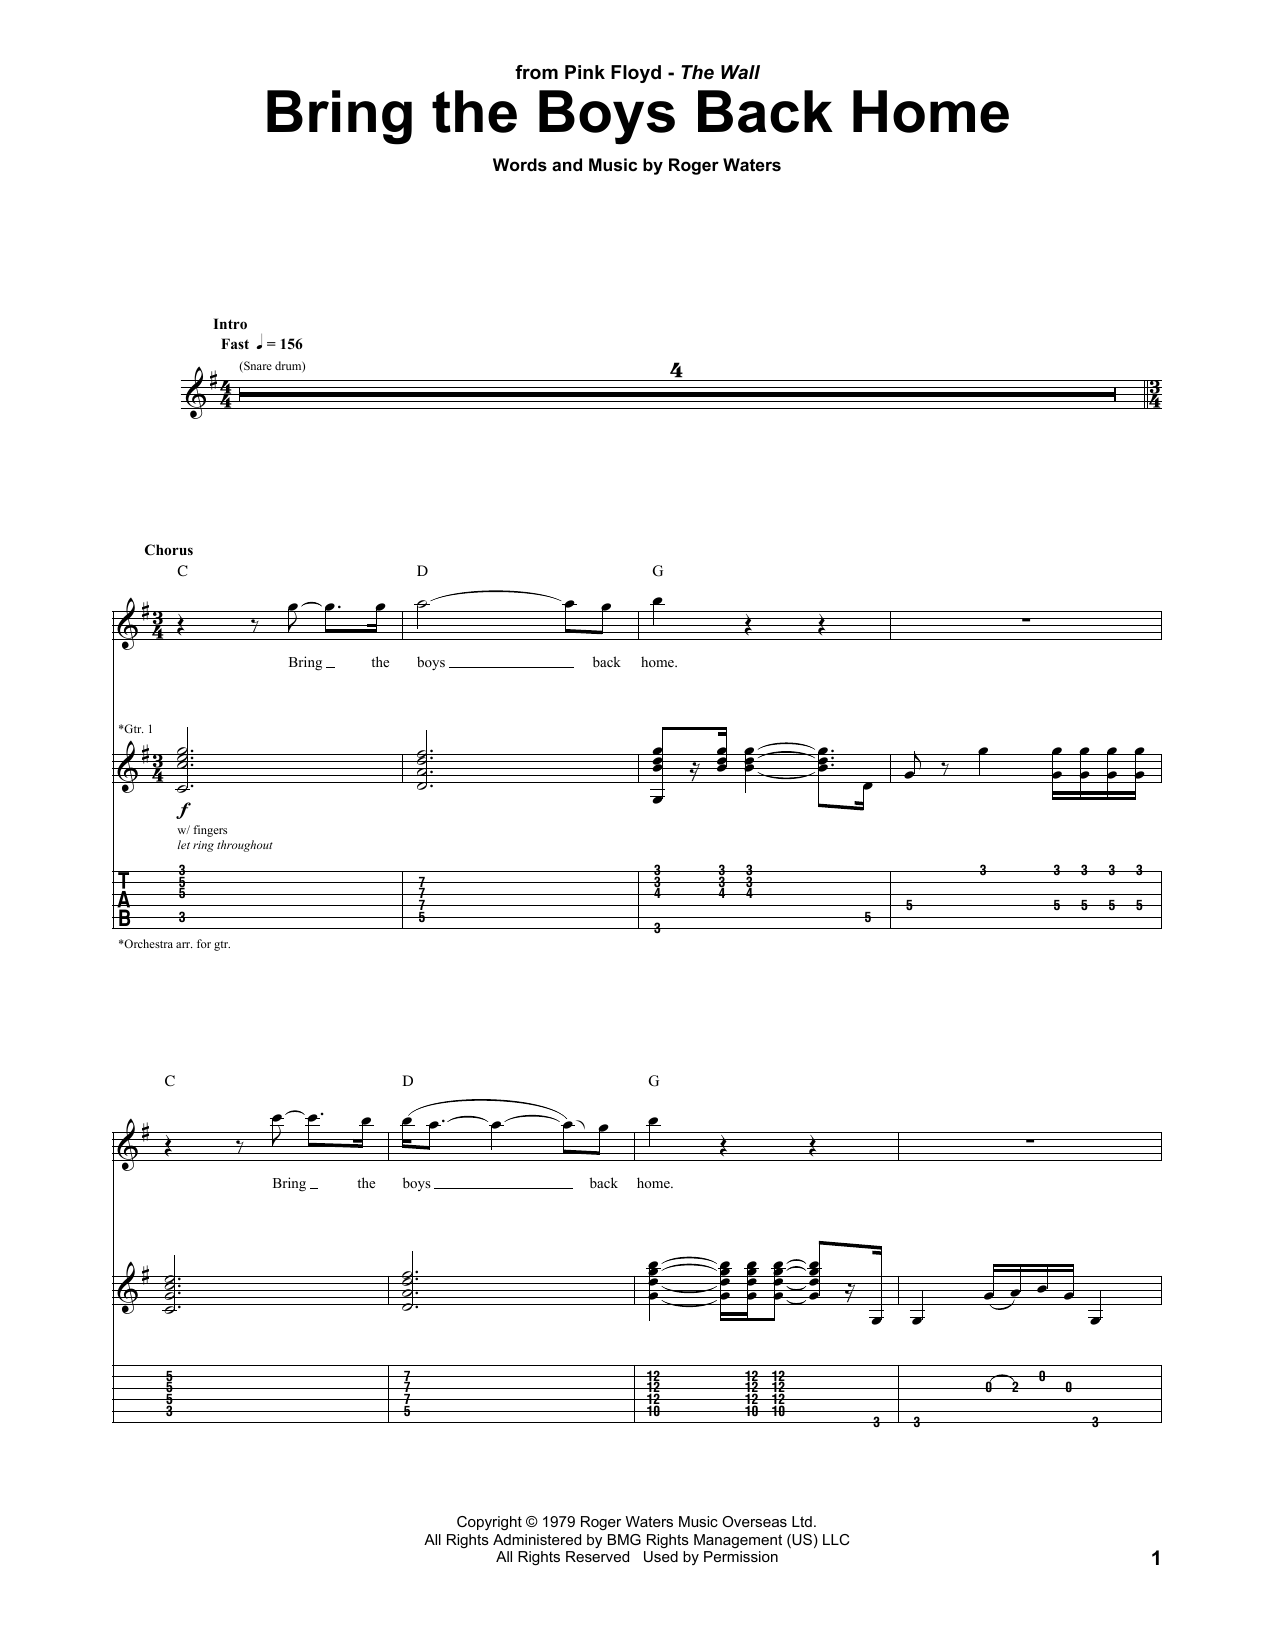 Download Pink Floyd Bring The Boys Back Home Sheet Music